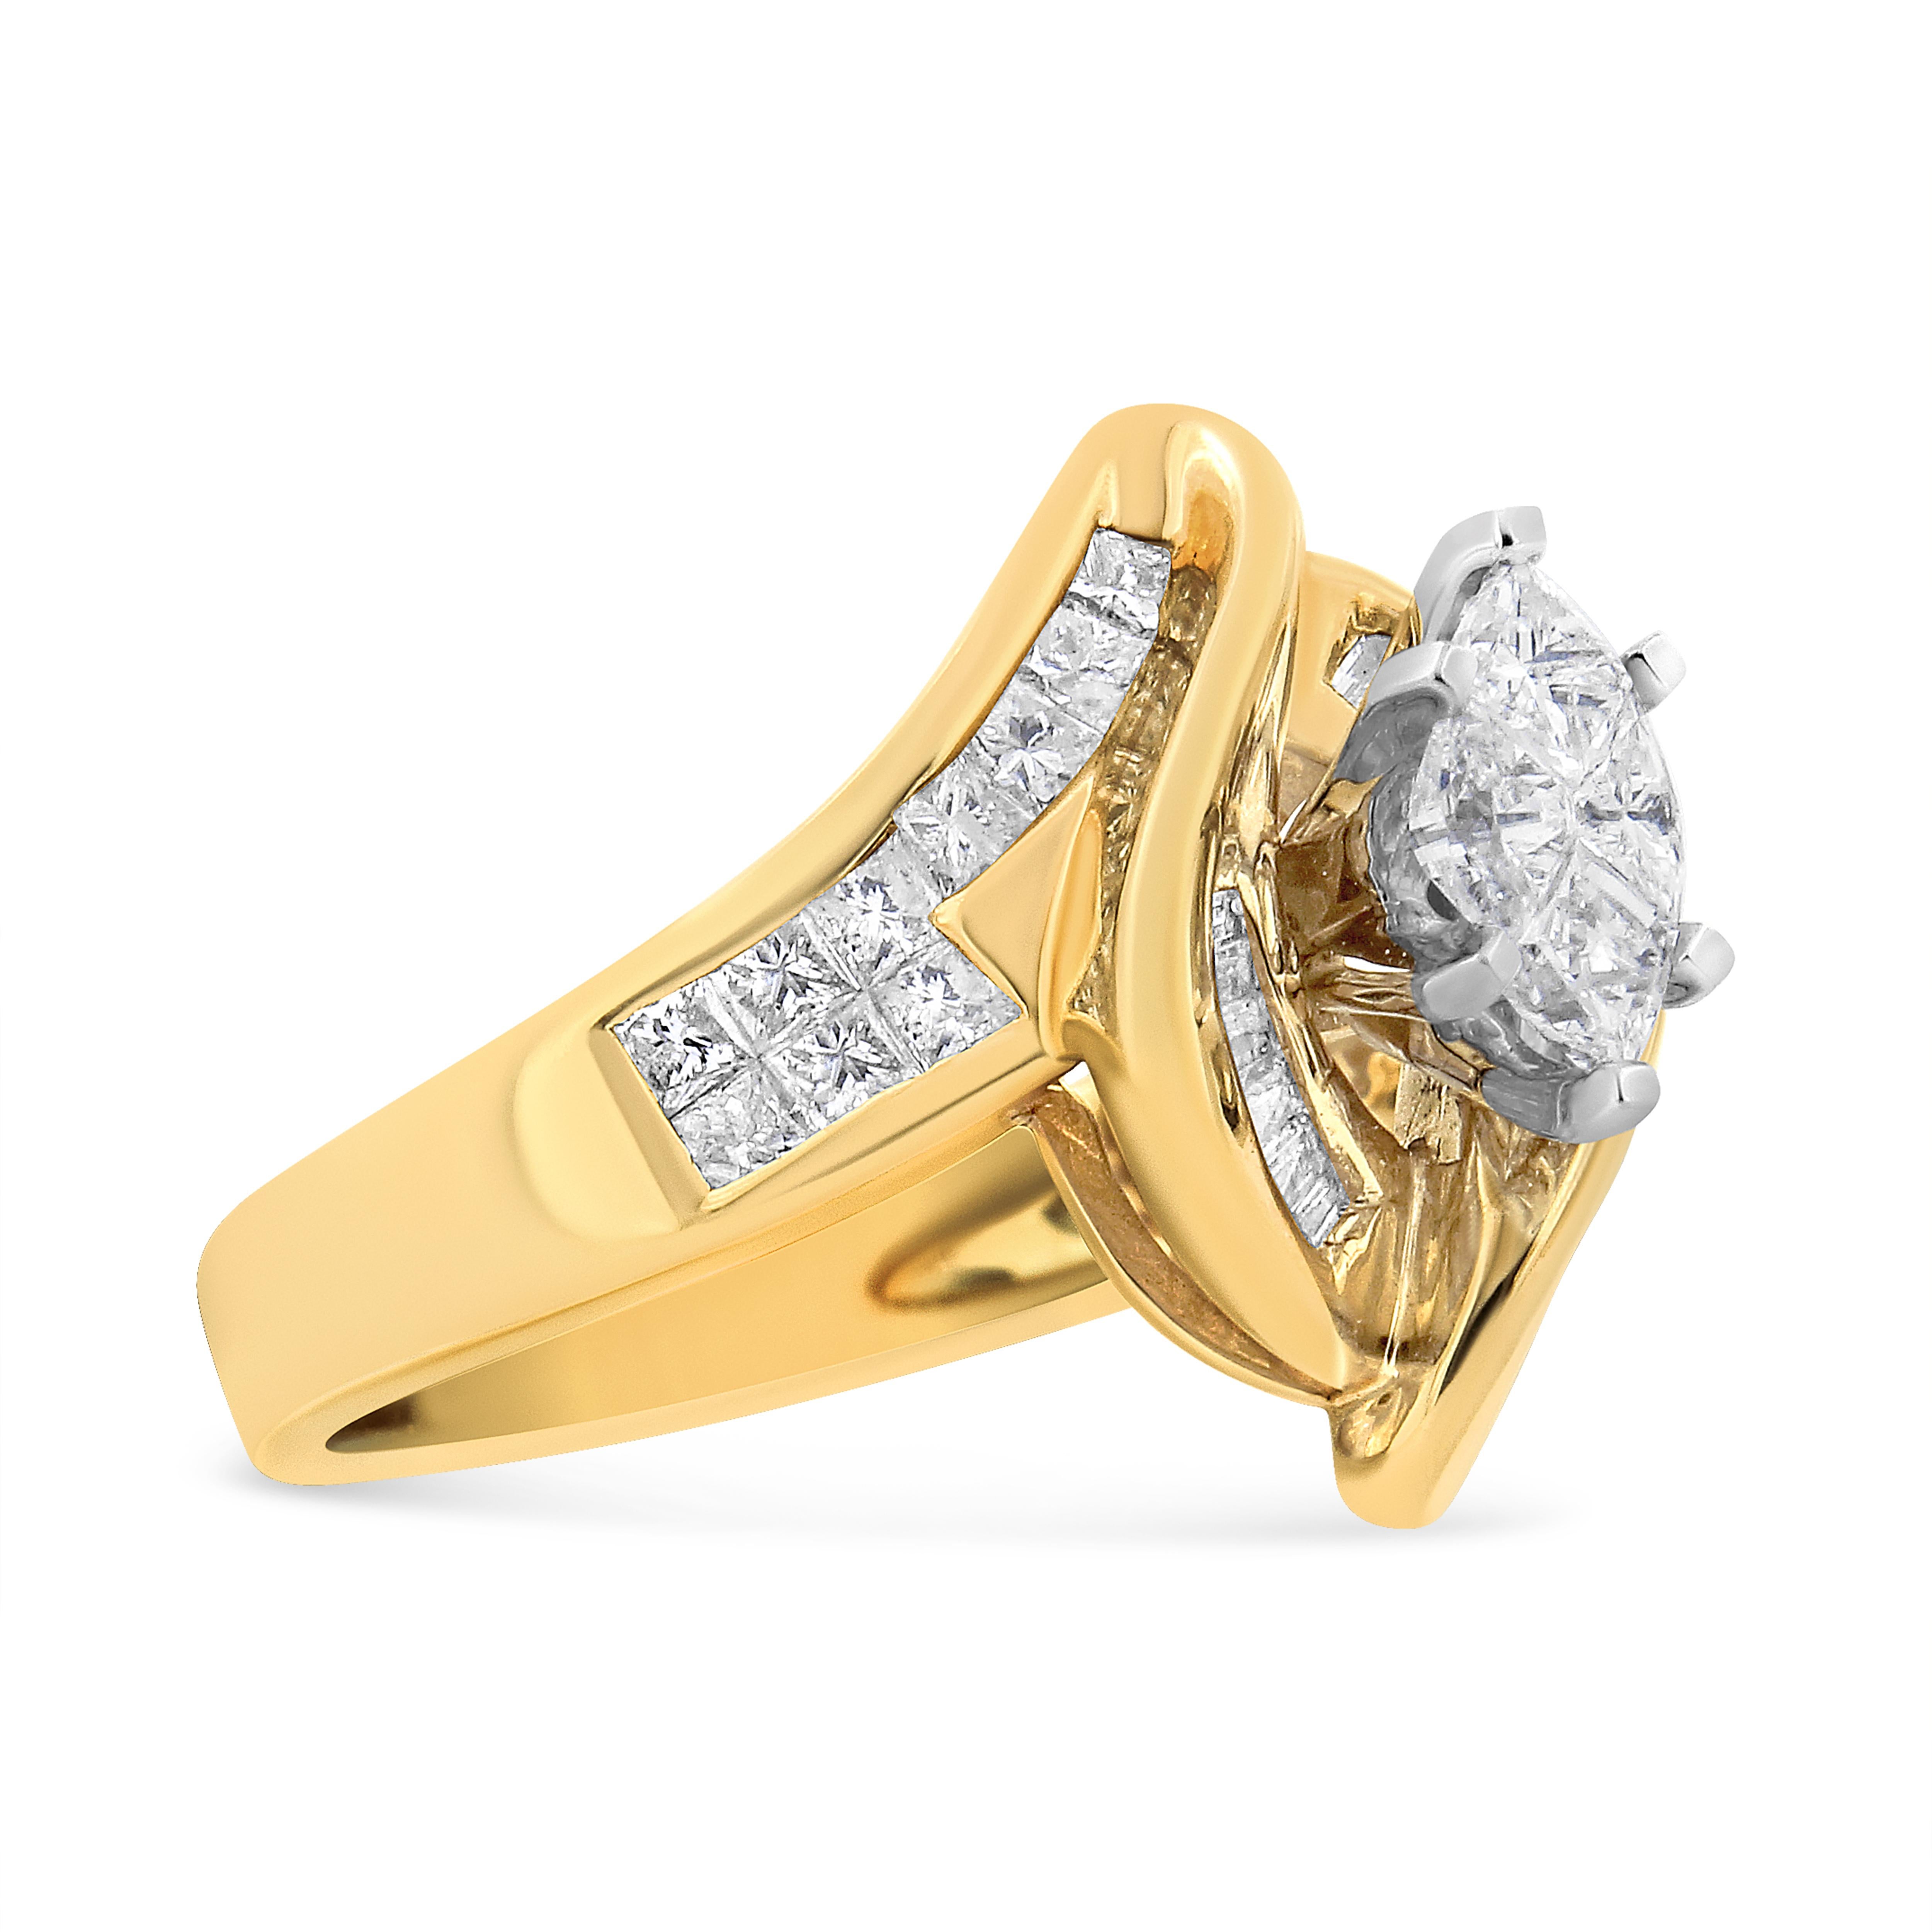 For Sale:  14K Yellow Gold 1 1/4 Carat Diamond Marquise Shaped Ring 2